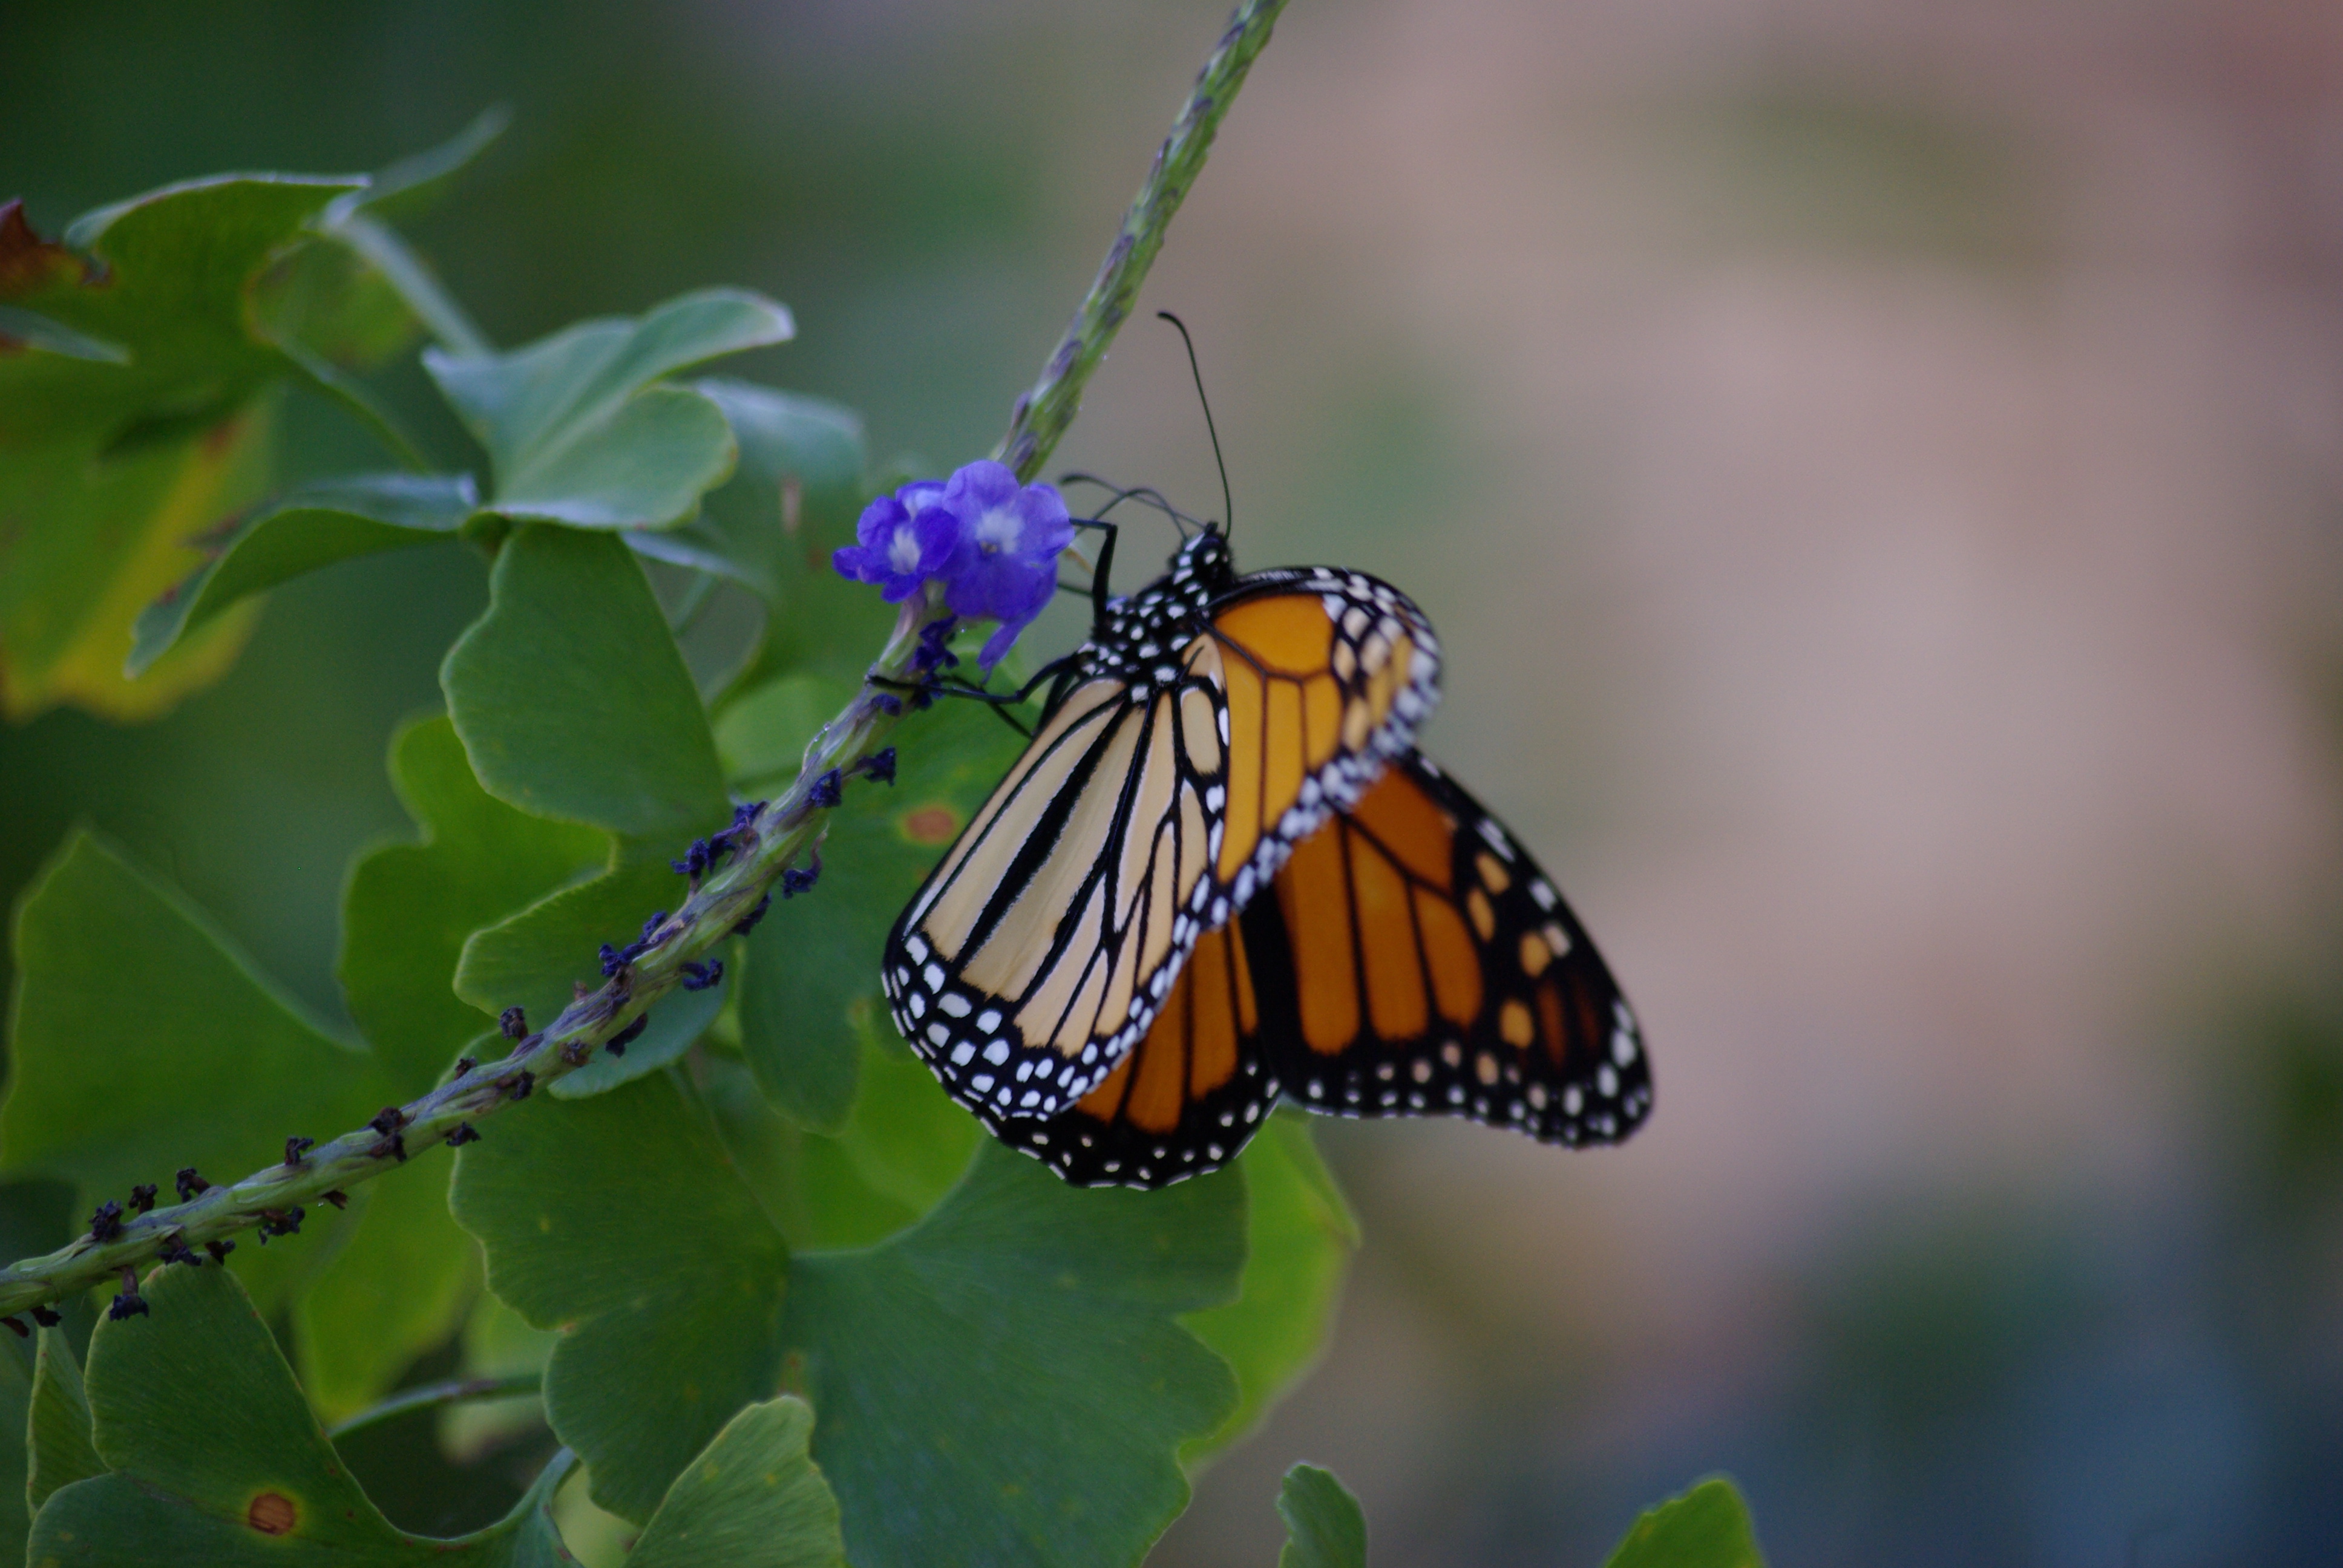 Monarch butterfly on blue porterweed, Dallas, TX October 2010 - photo by Ed Darrell IMGP5343